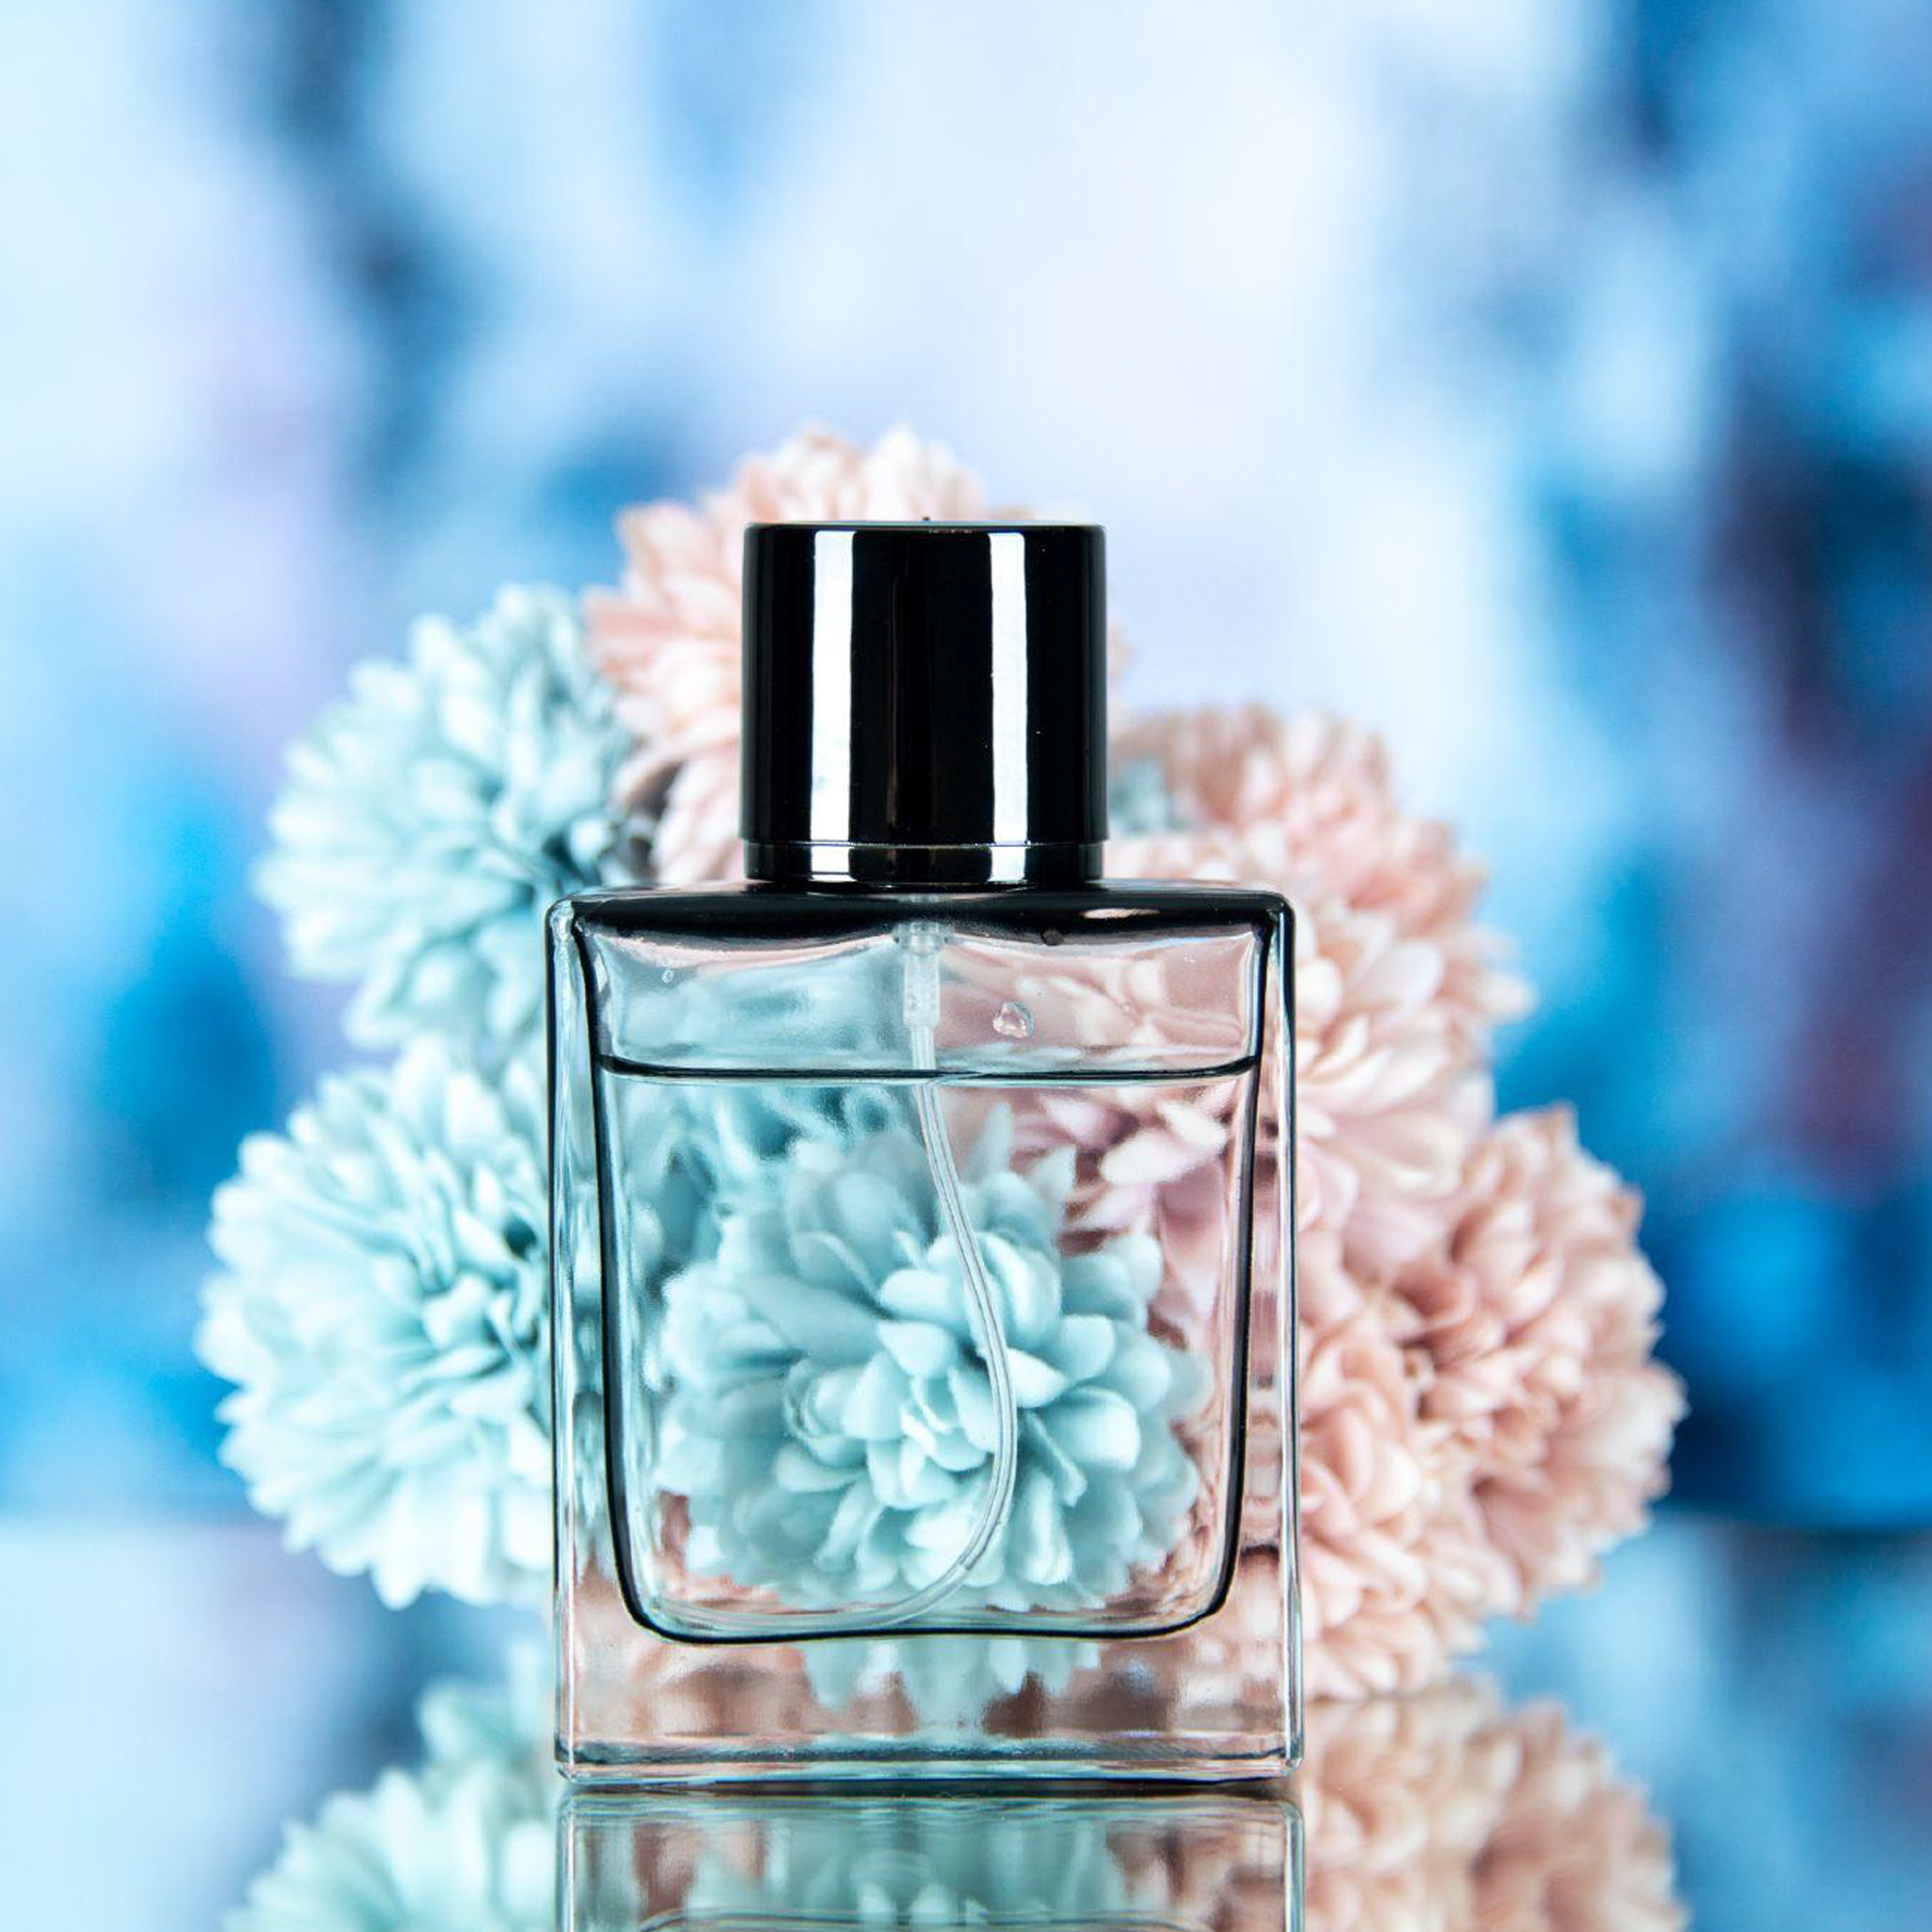 5 Ways to Find the Right Fragrance in an Online Store